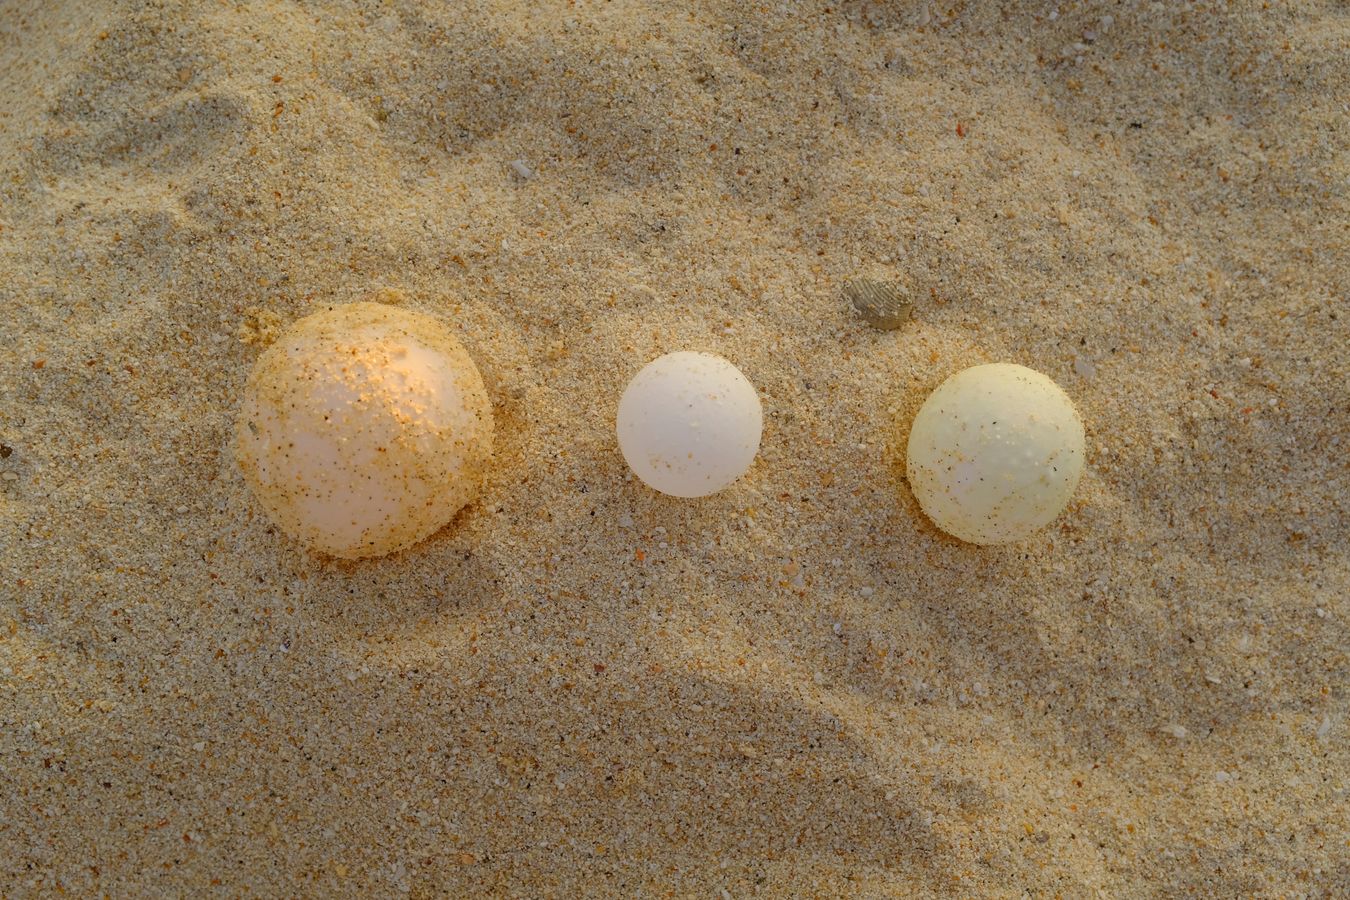 Three green turtle eggs, only the one on the left is normal in size, shape and color.